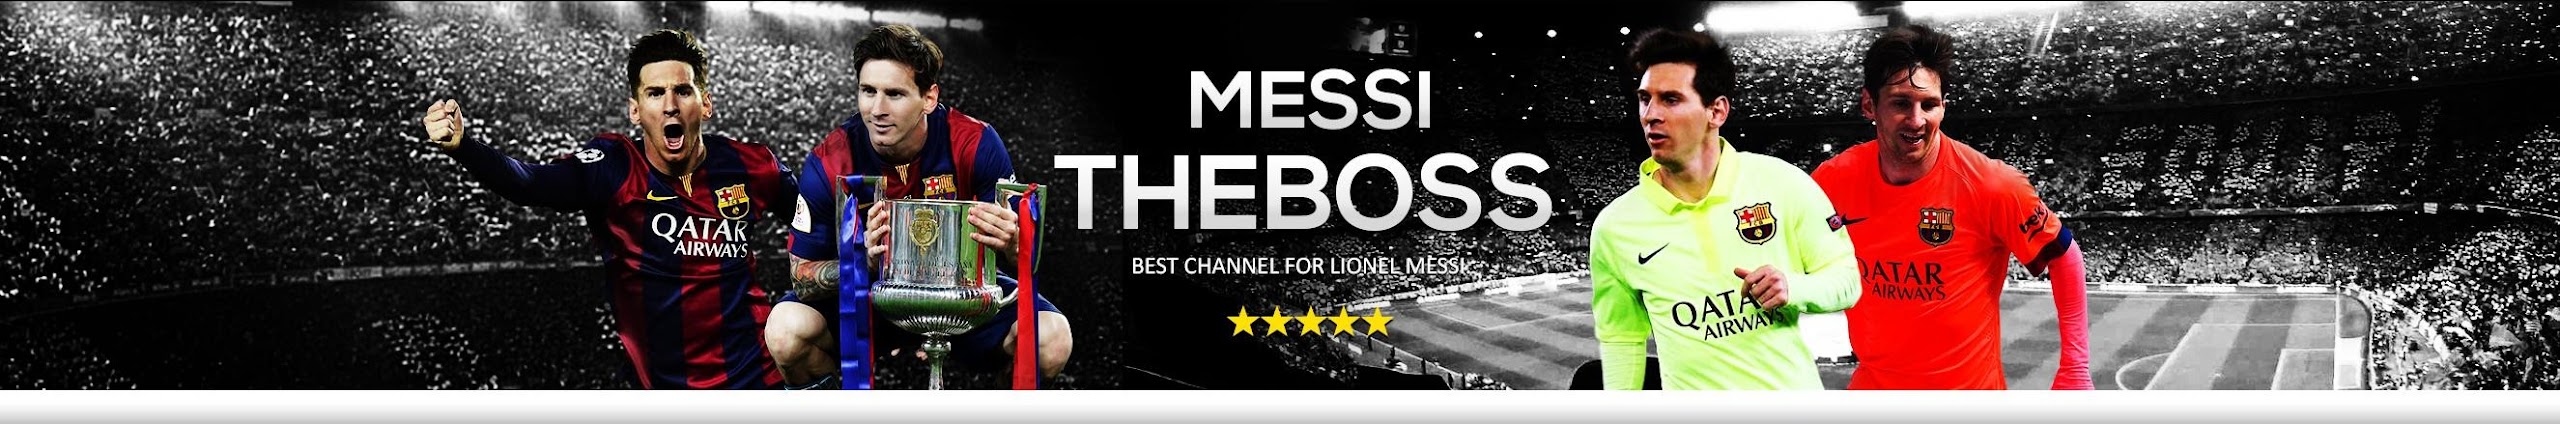 Messi TheBoss - On Tuby